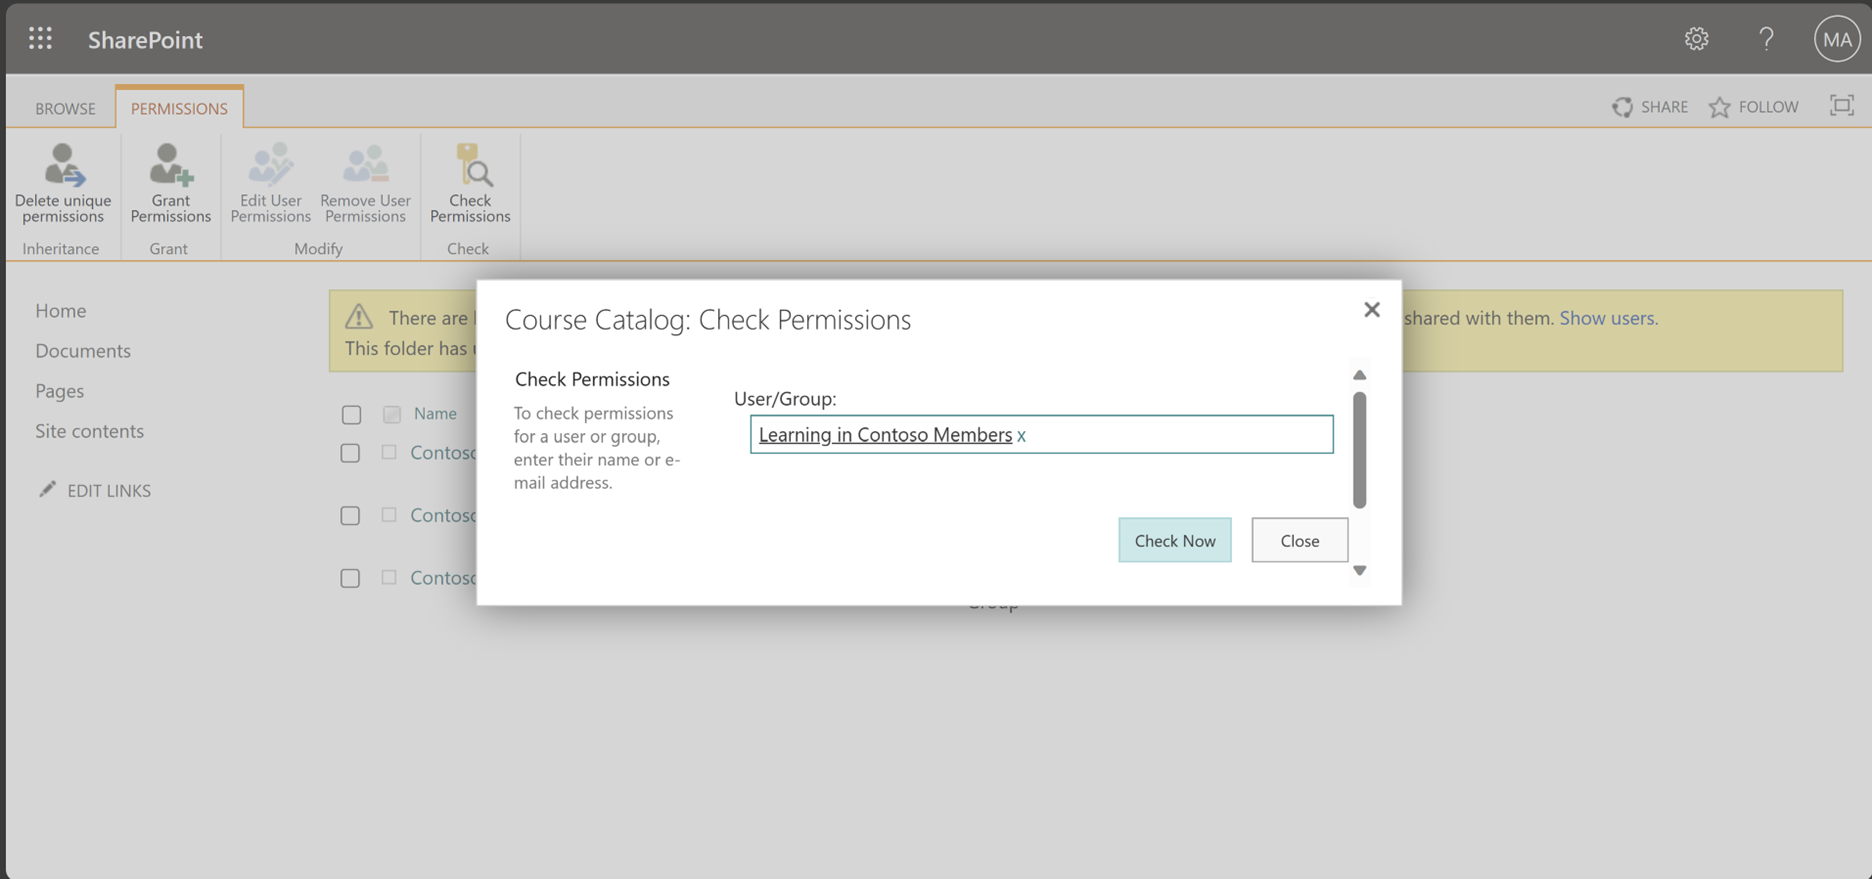 Screenshot of the course catalog check permissions window with the option to check the name of the group